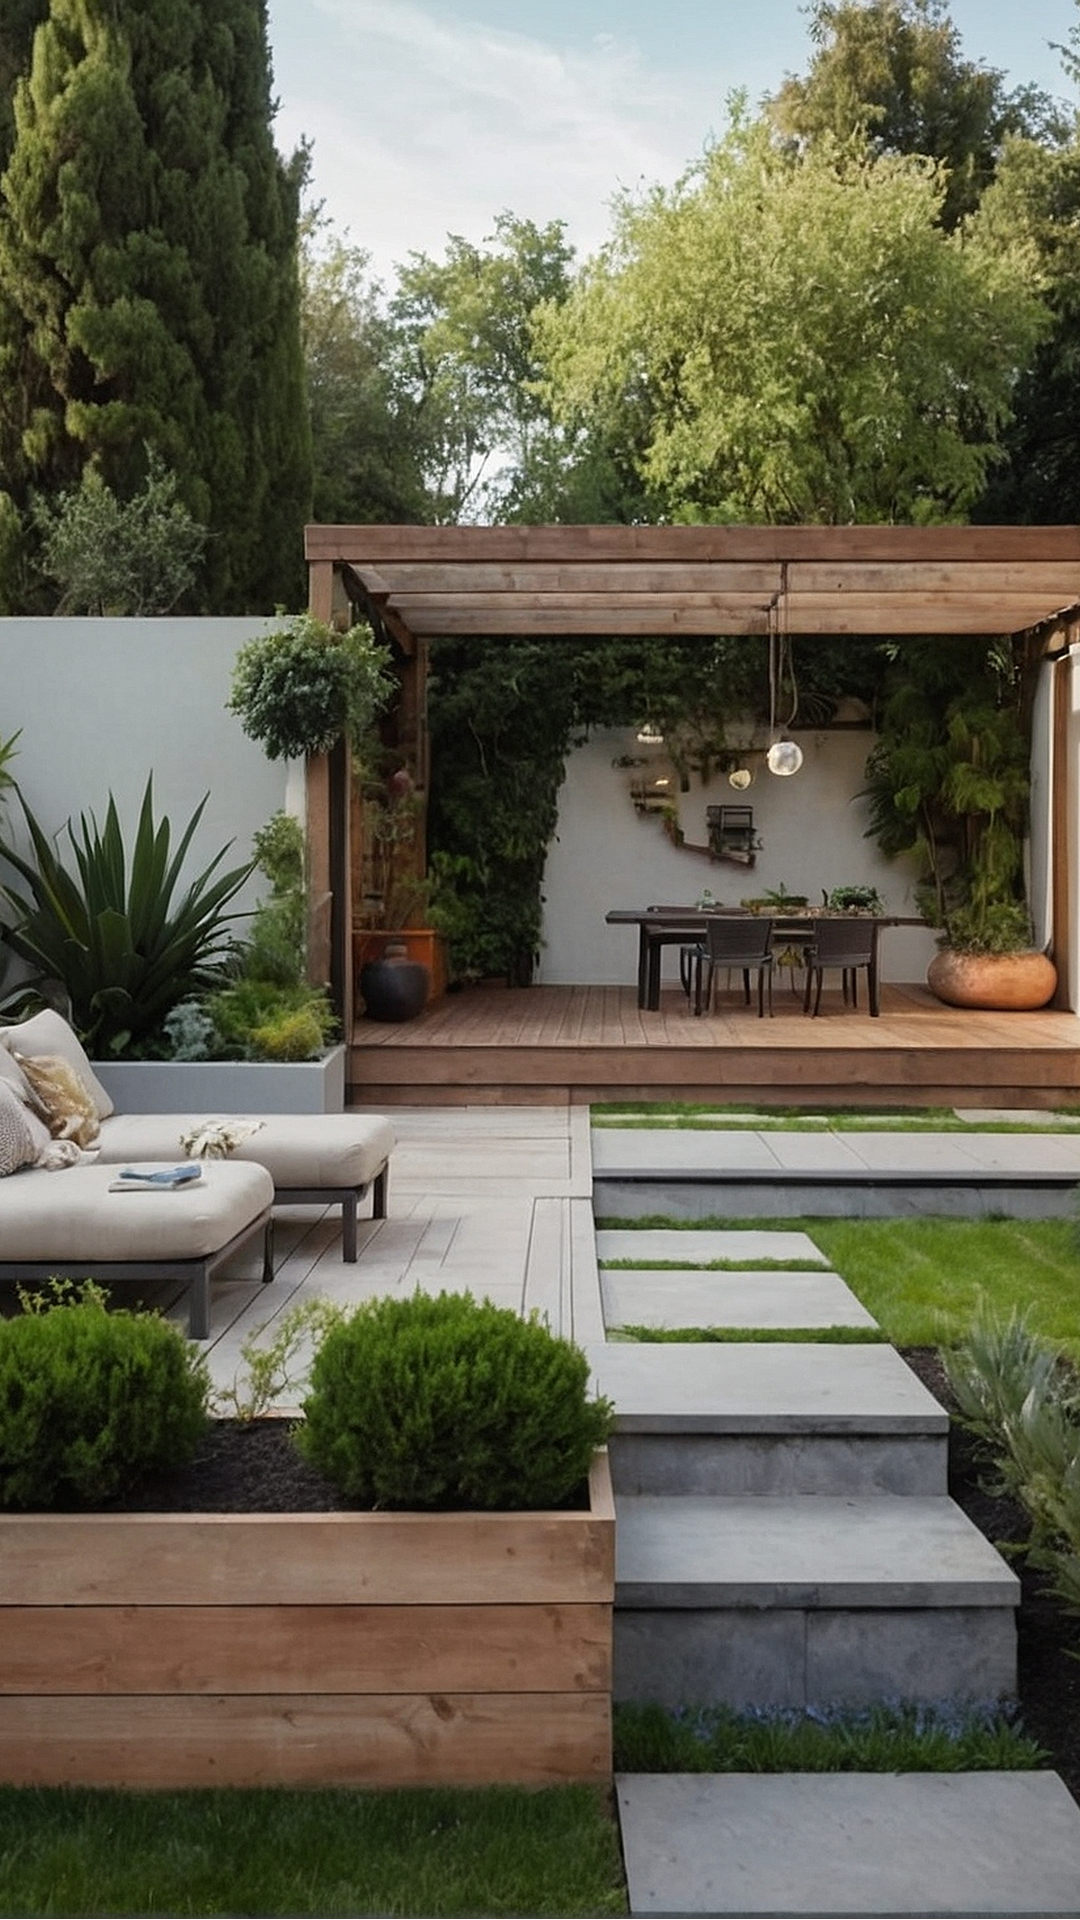 The Art of Small Garden: Layout Designs and Ideas